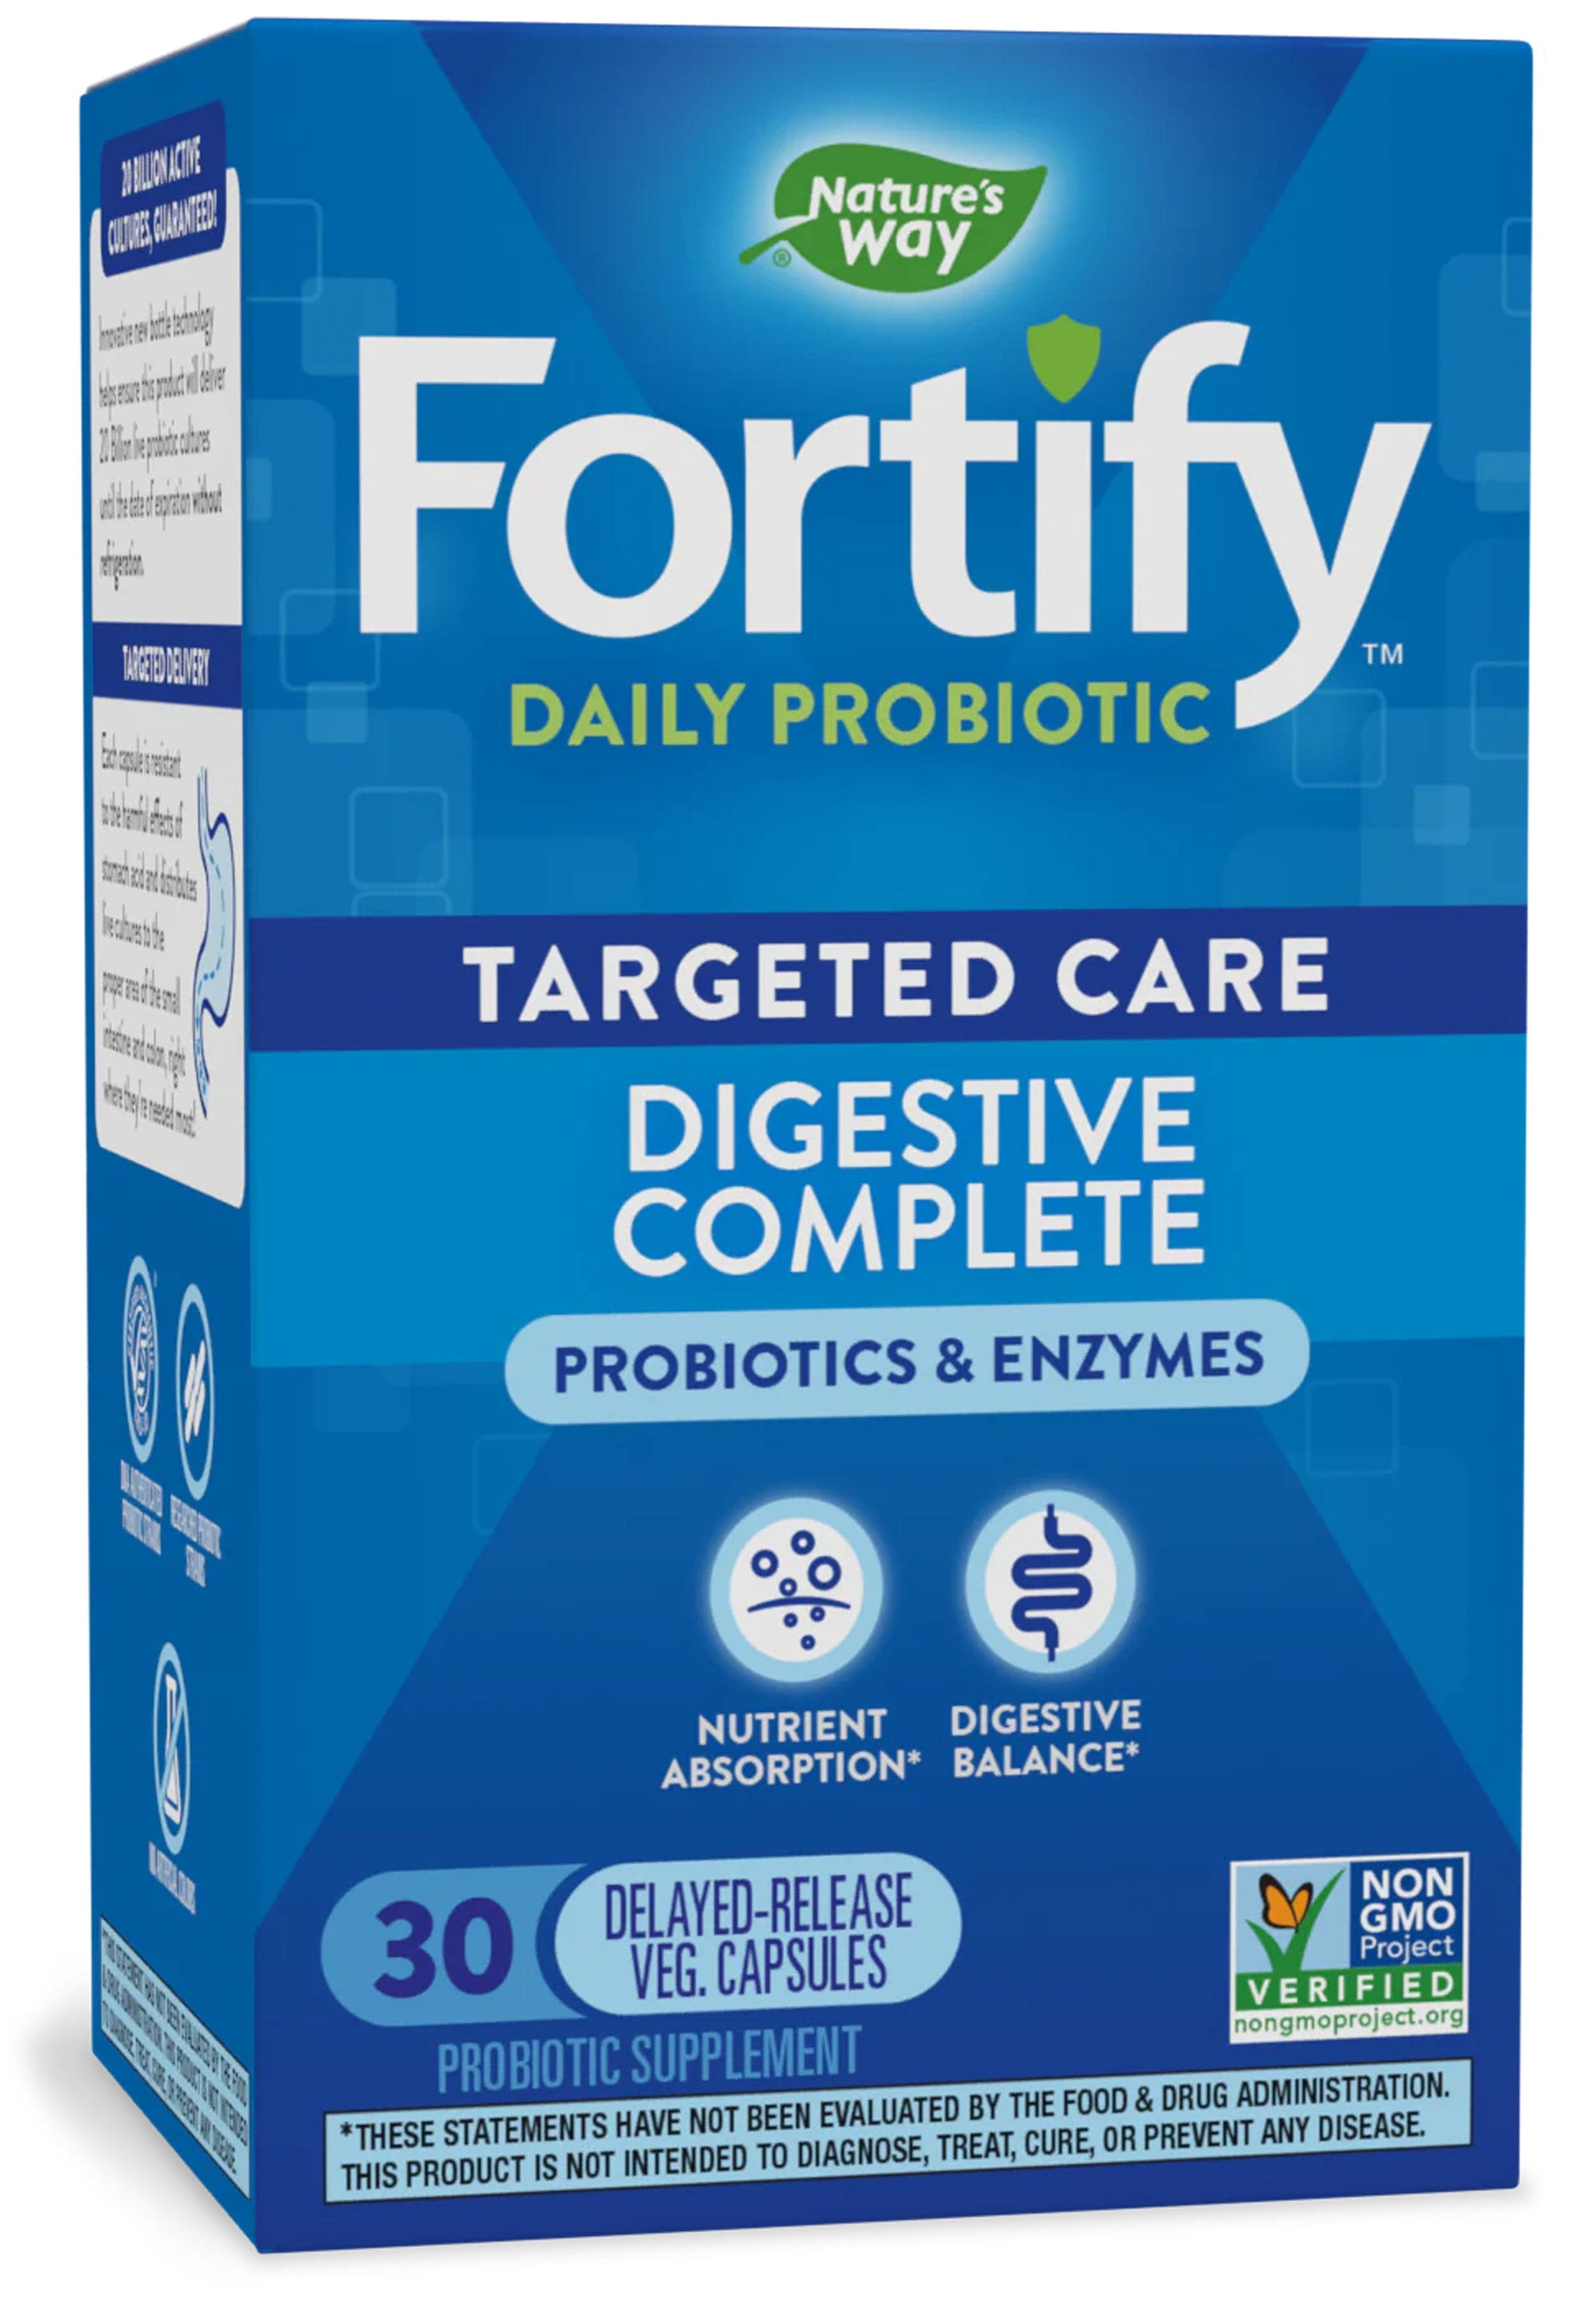 Nature's Way Fortify Daily Probiotic Targeted Care Digestive Complete